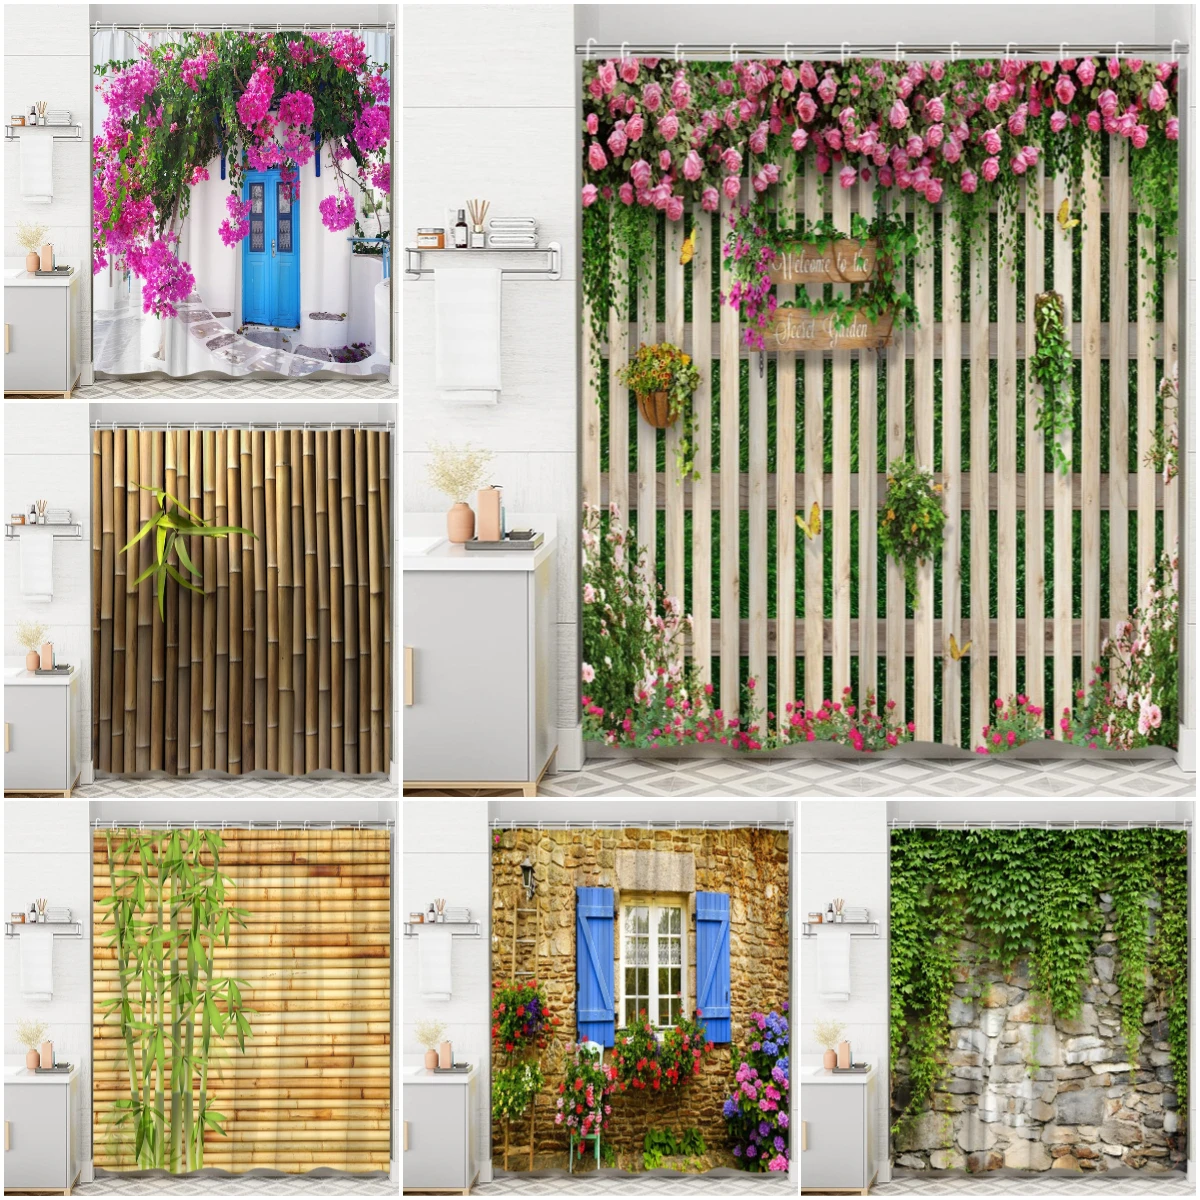 Flower Wall Shower Curtain, Street View Spring Greenery Vines Bamboo Farm Brick Wall Home Bathroom Decor with Hooks